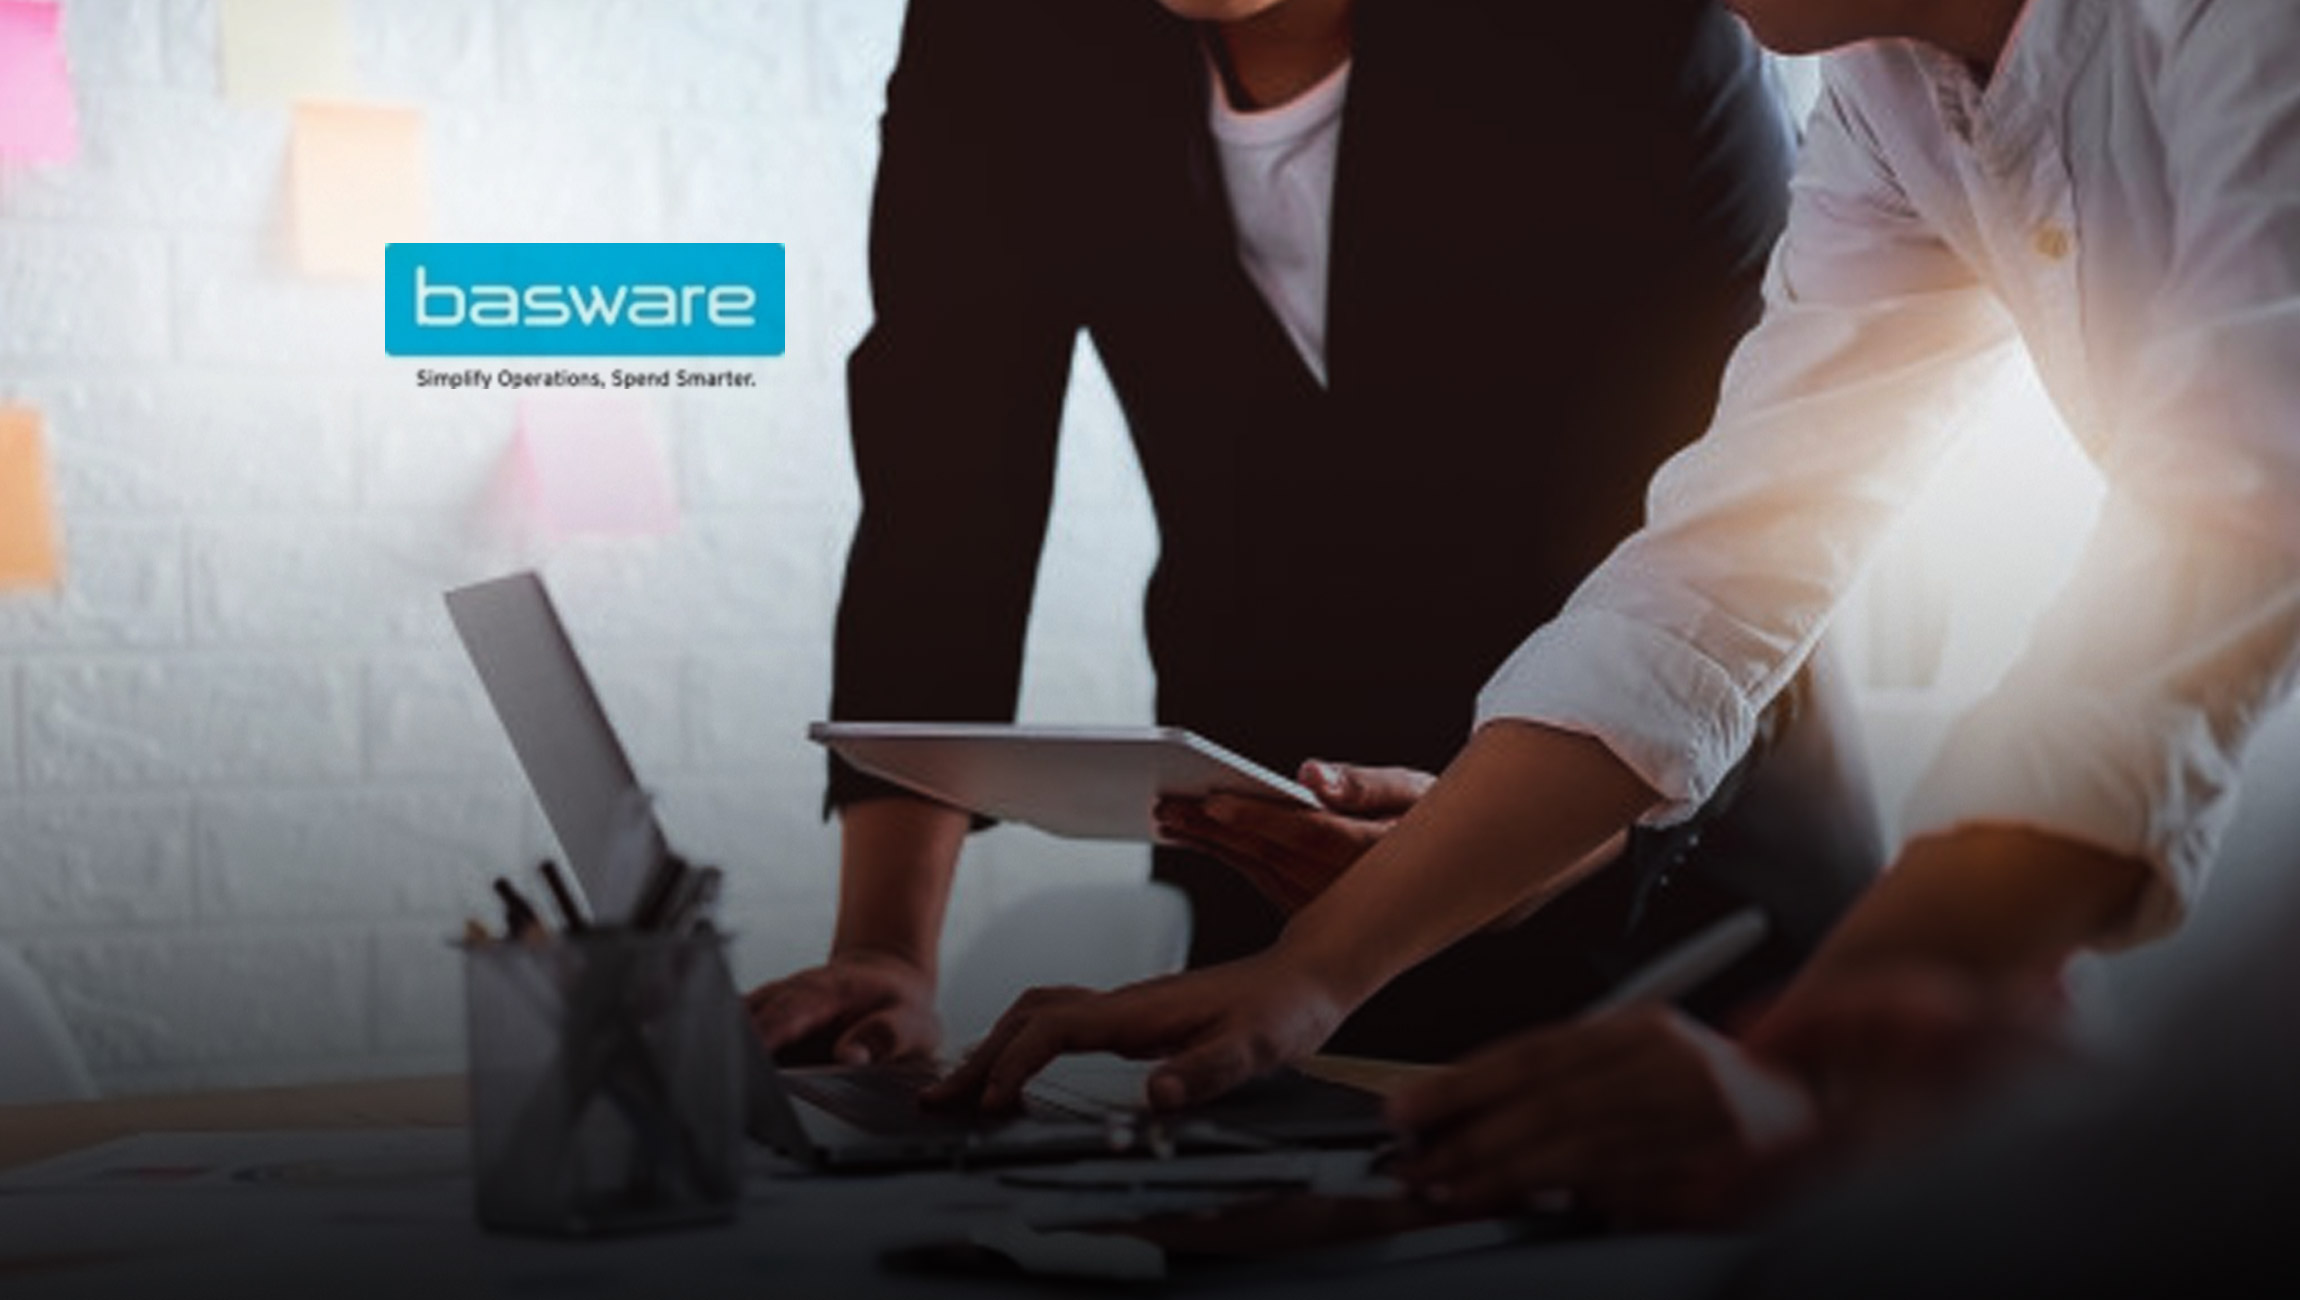 Basware Launches Partner Center of Excellence to Enable World-Class Partner Implementations